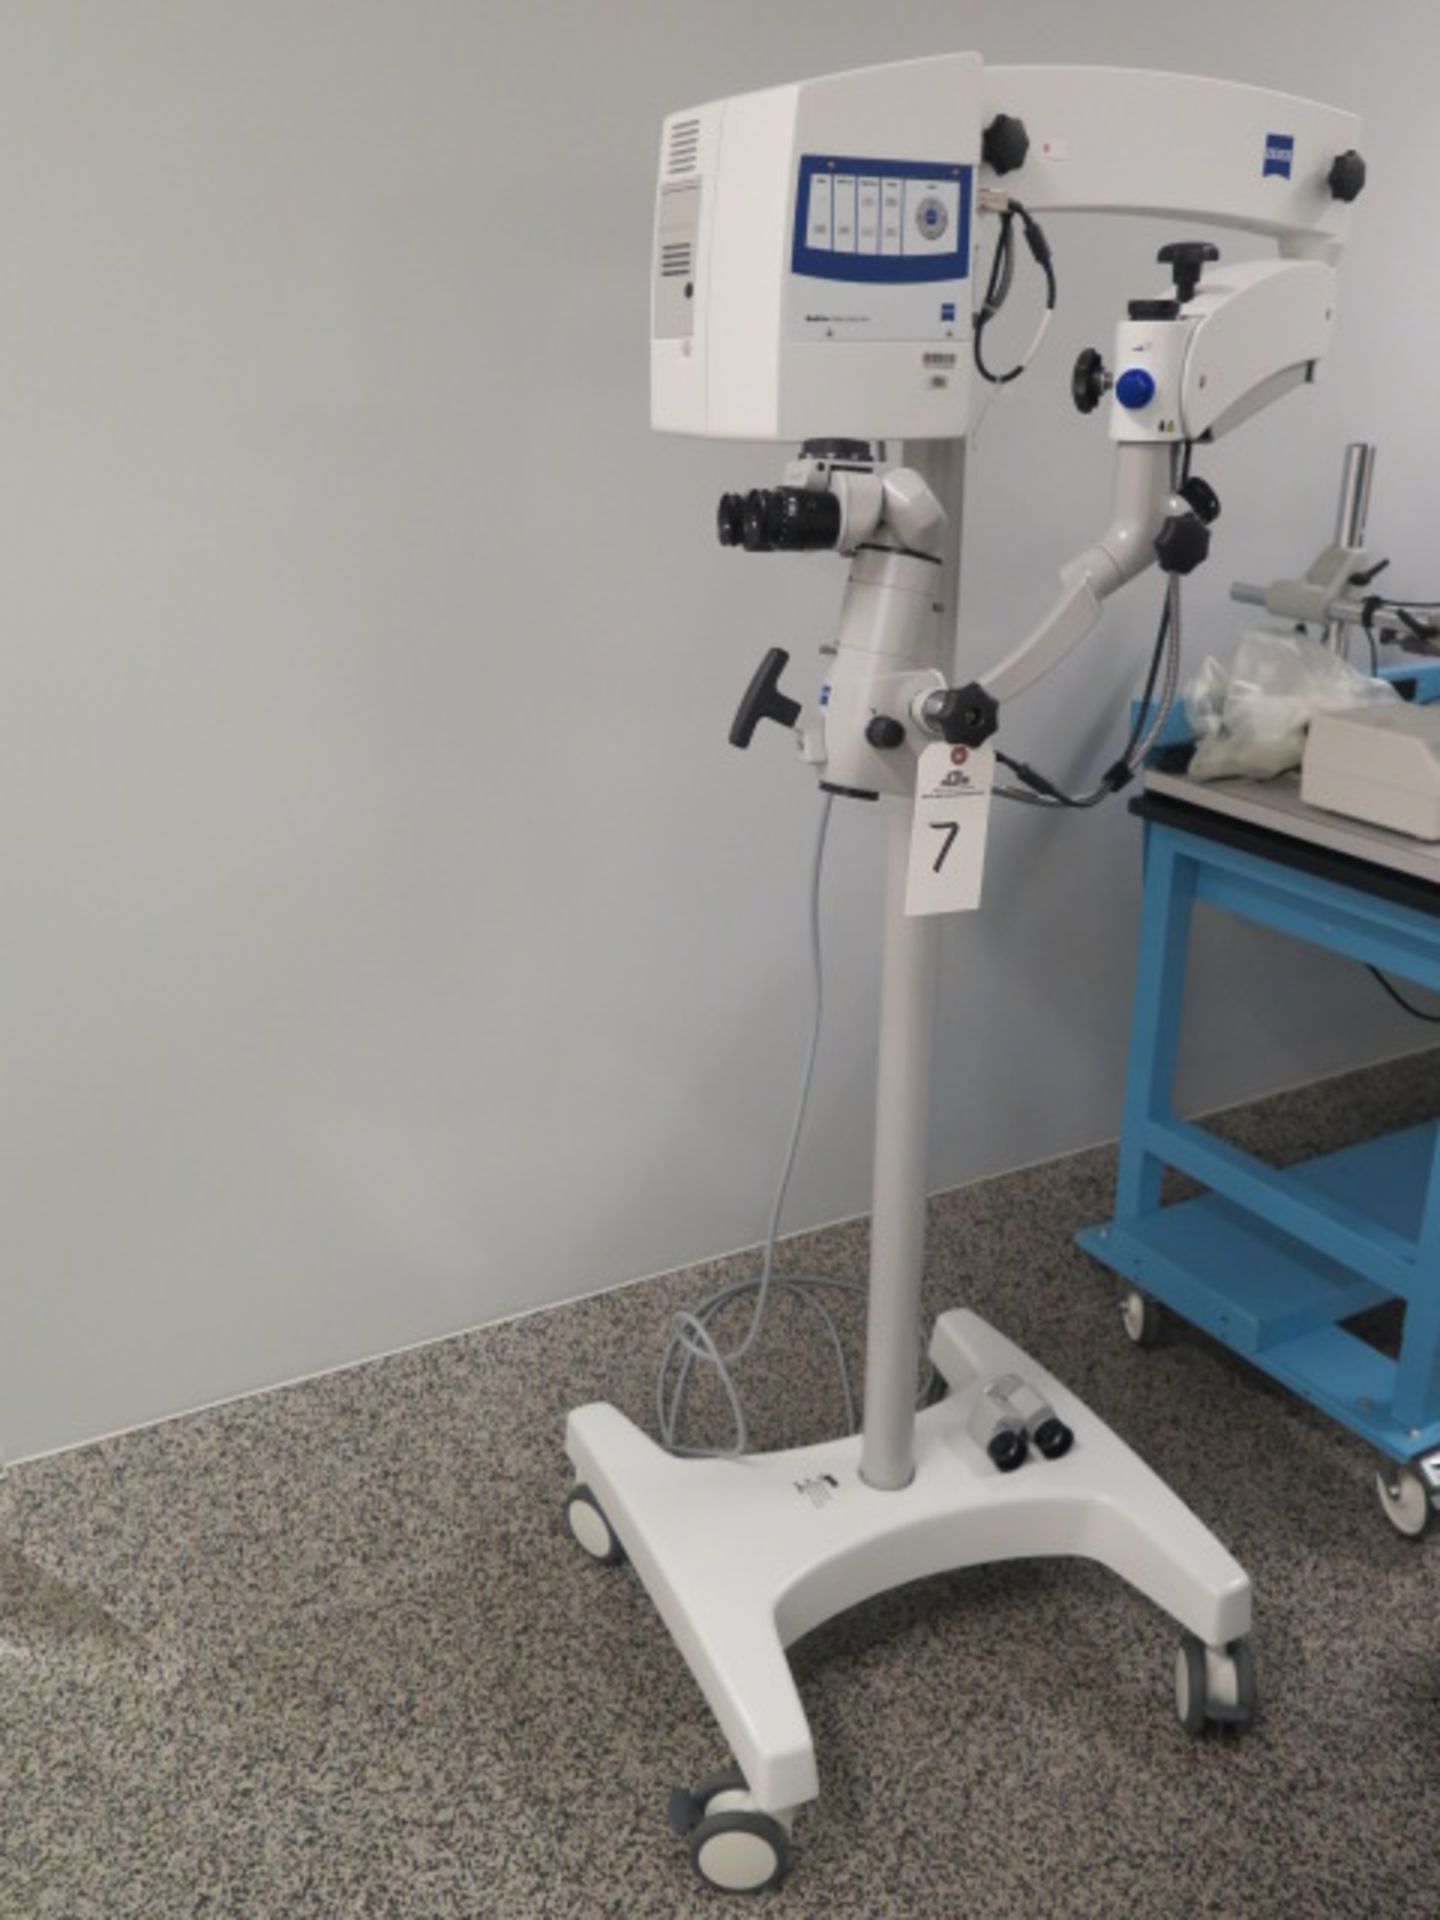 Zeiss Surgical GmbH Surgical Video Microscope s/n 6627125528 w/ MediLive Video Control Unit, Live